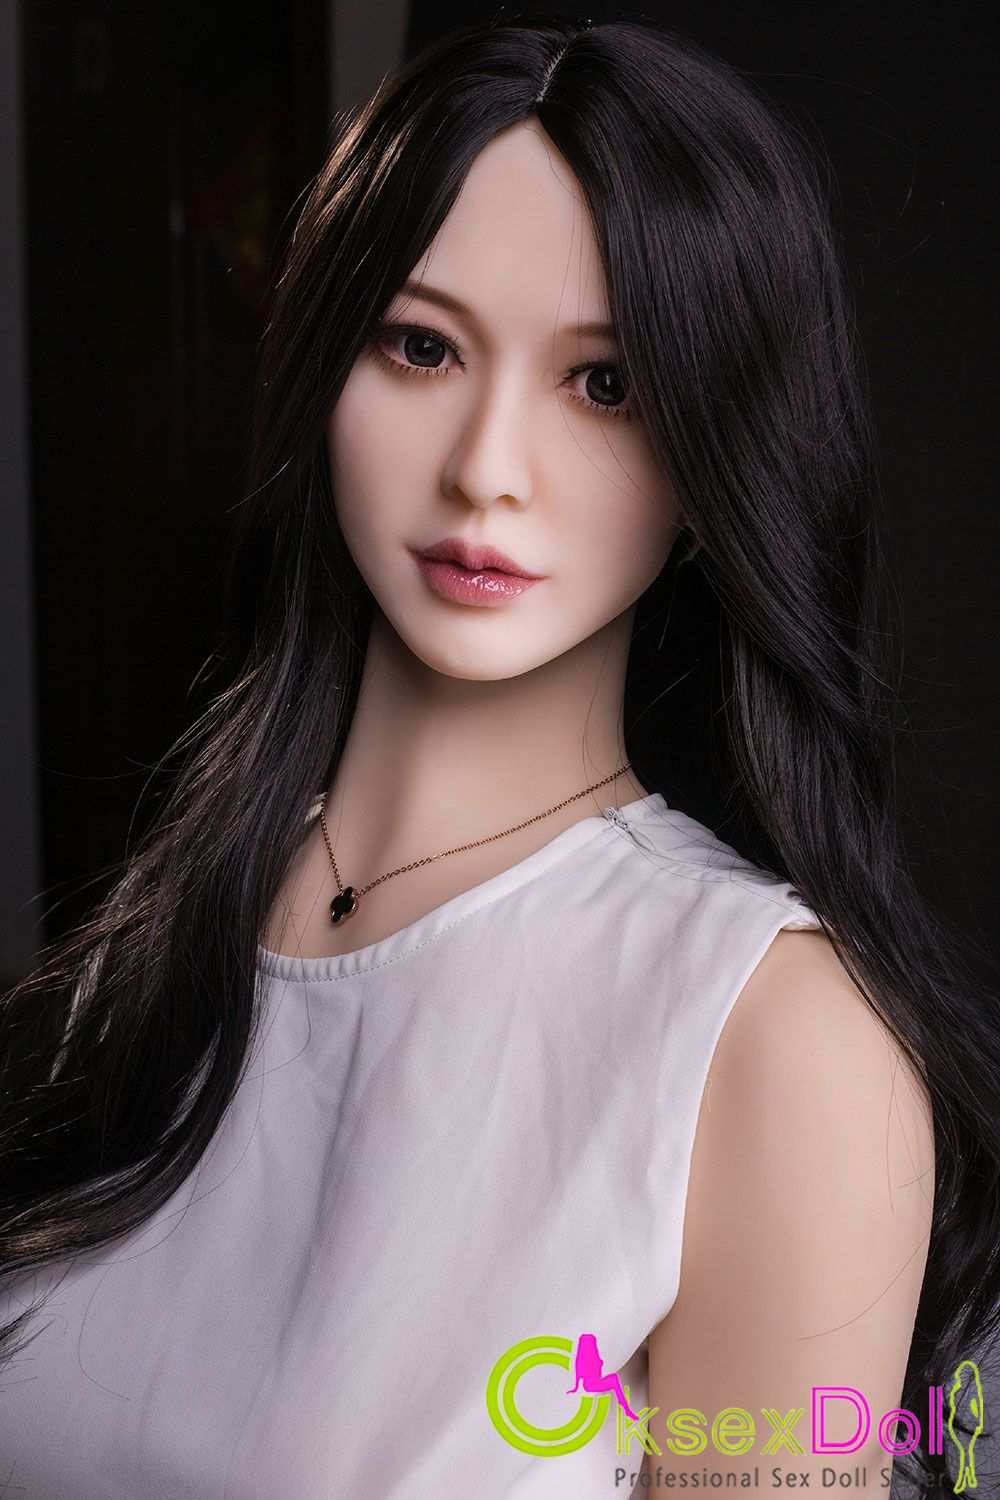 sex dolls that look Like humans Pictures